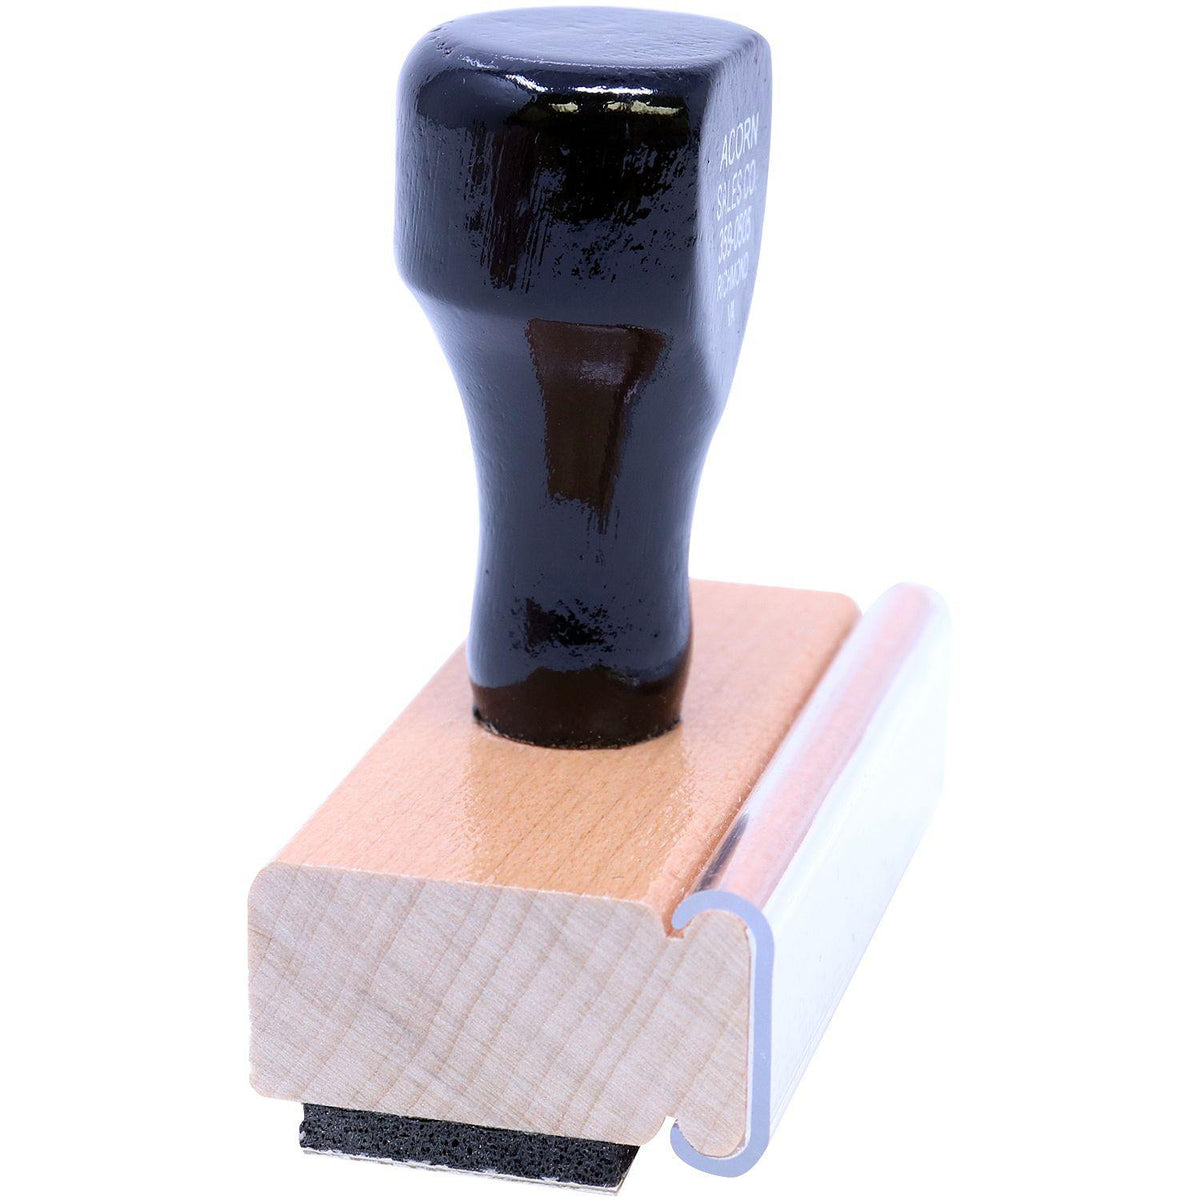 Side View of Validate Only Rubber Stamp at an Angle